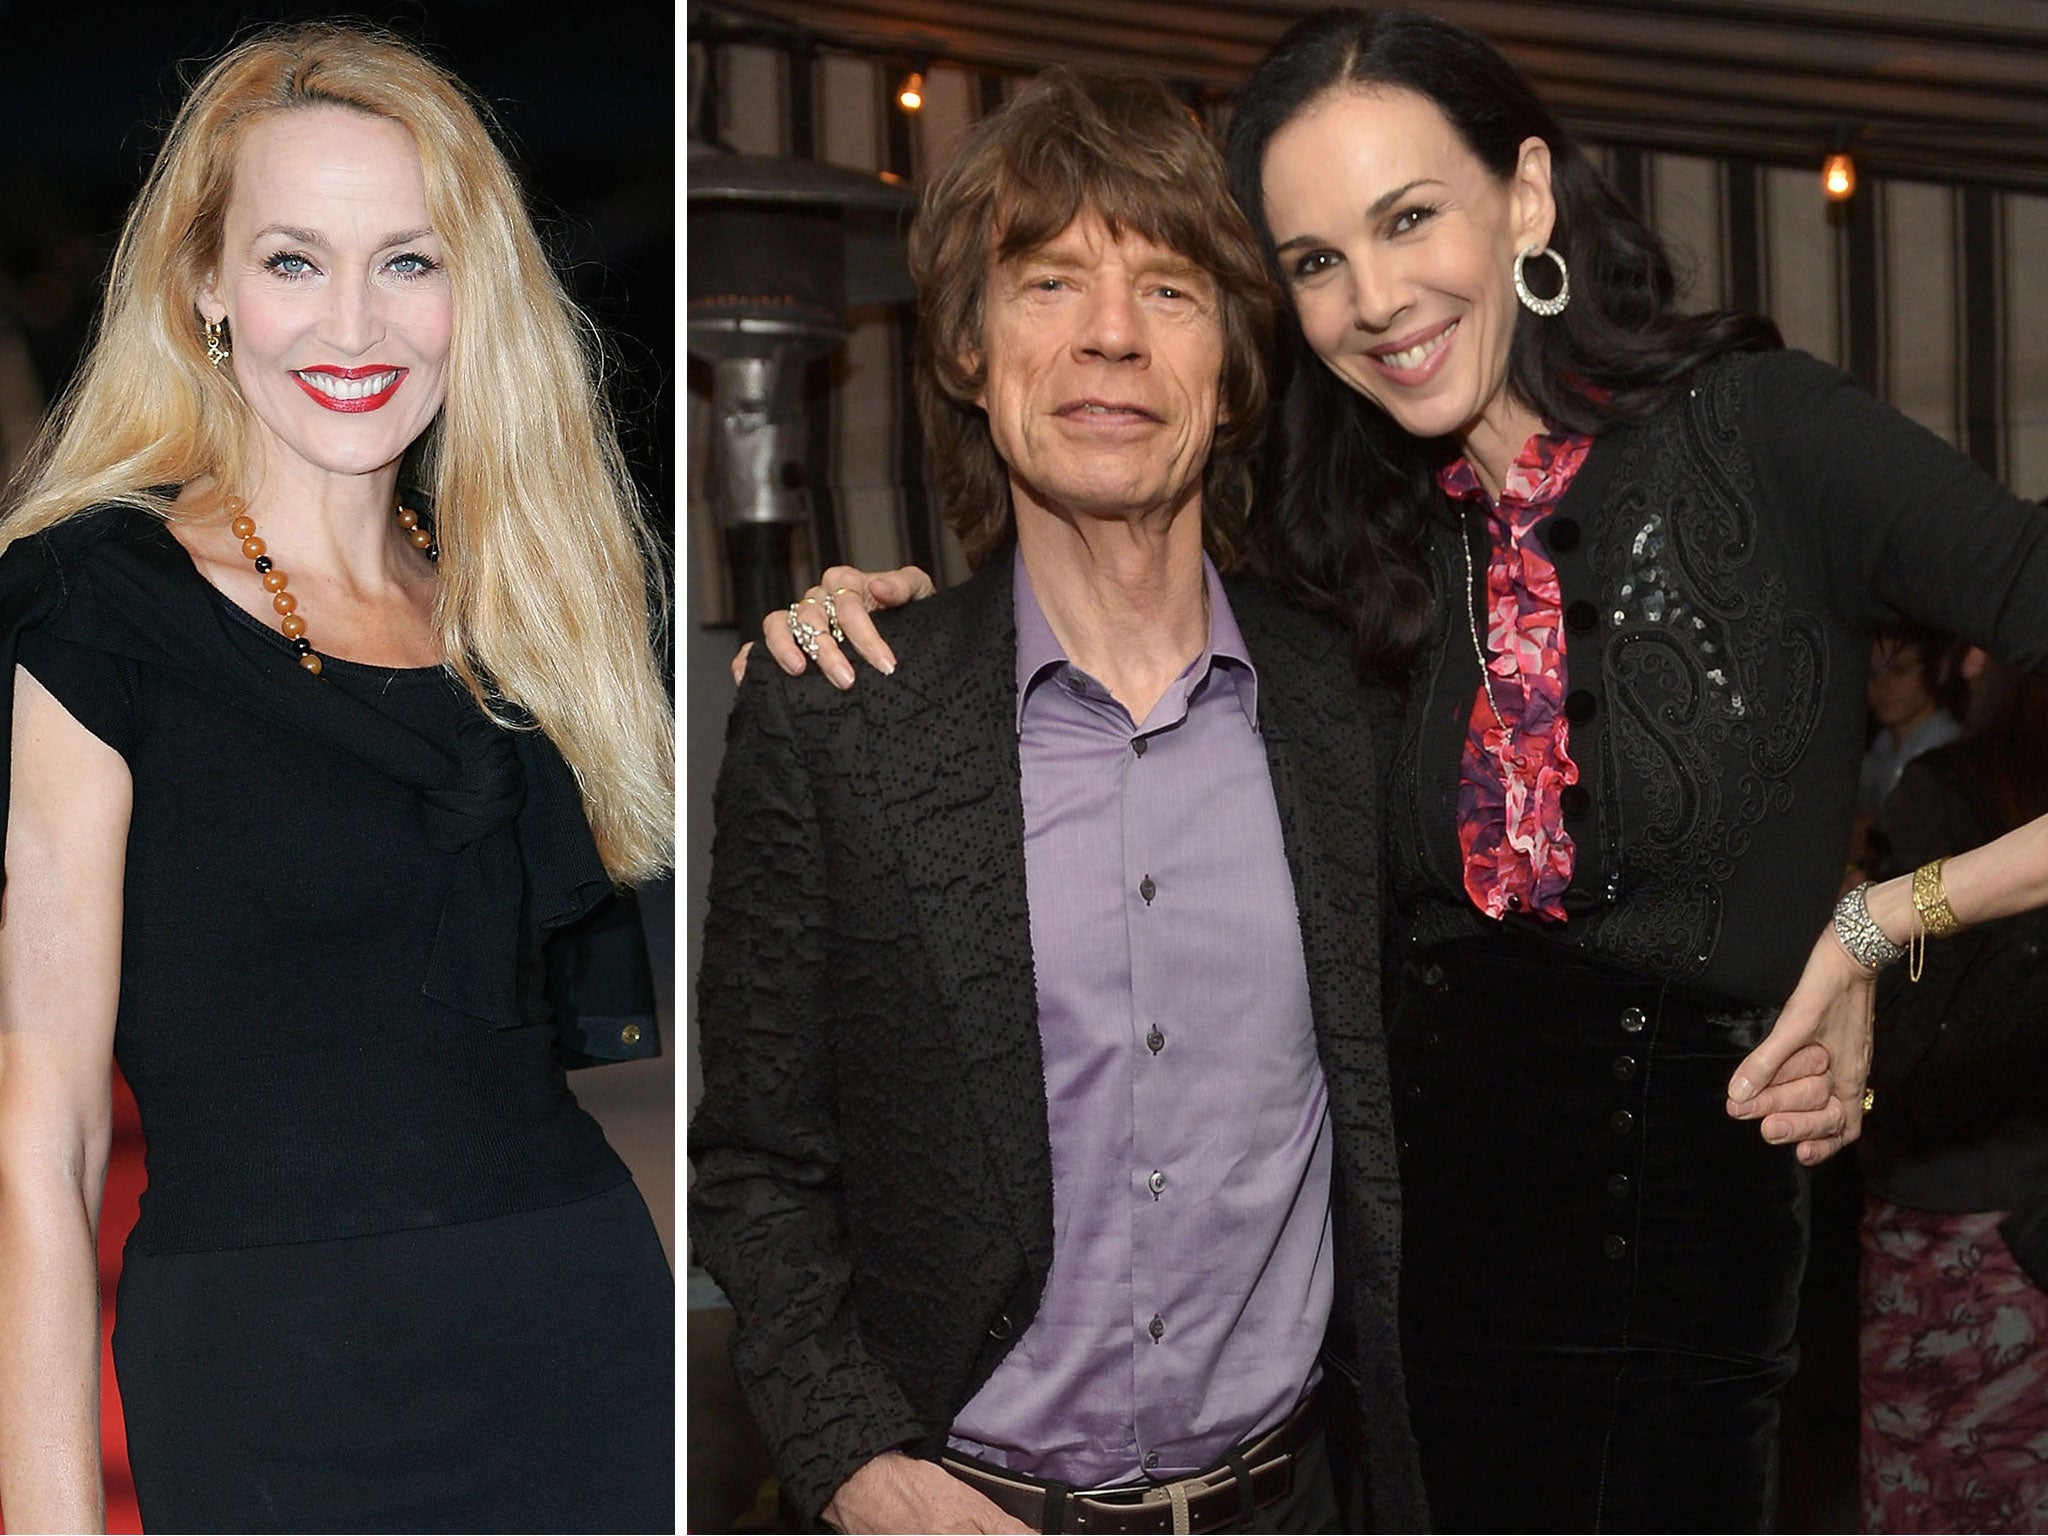 Jerry Hall says it will be "very difficult" for Sir Mick Jagger when he returns to the Rolling Stones concert tour following the death of L'Wren Scott